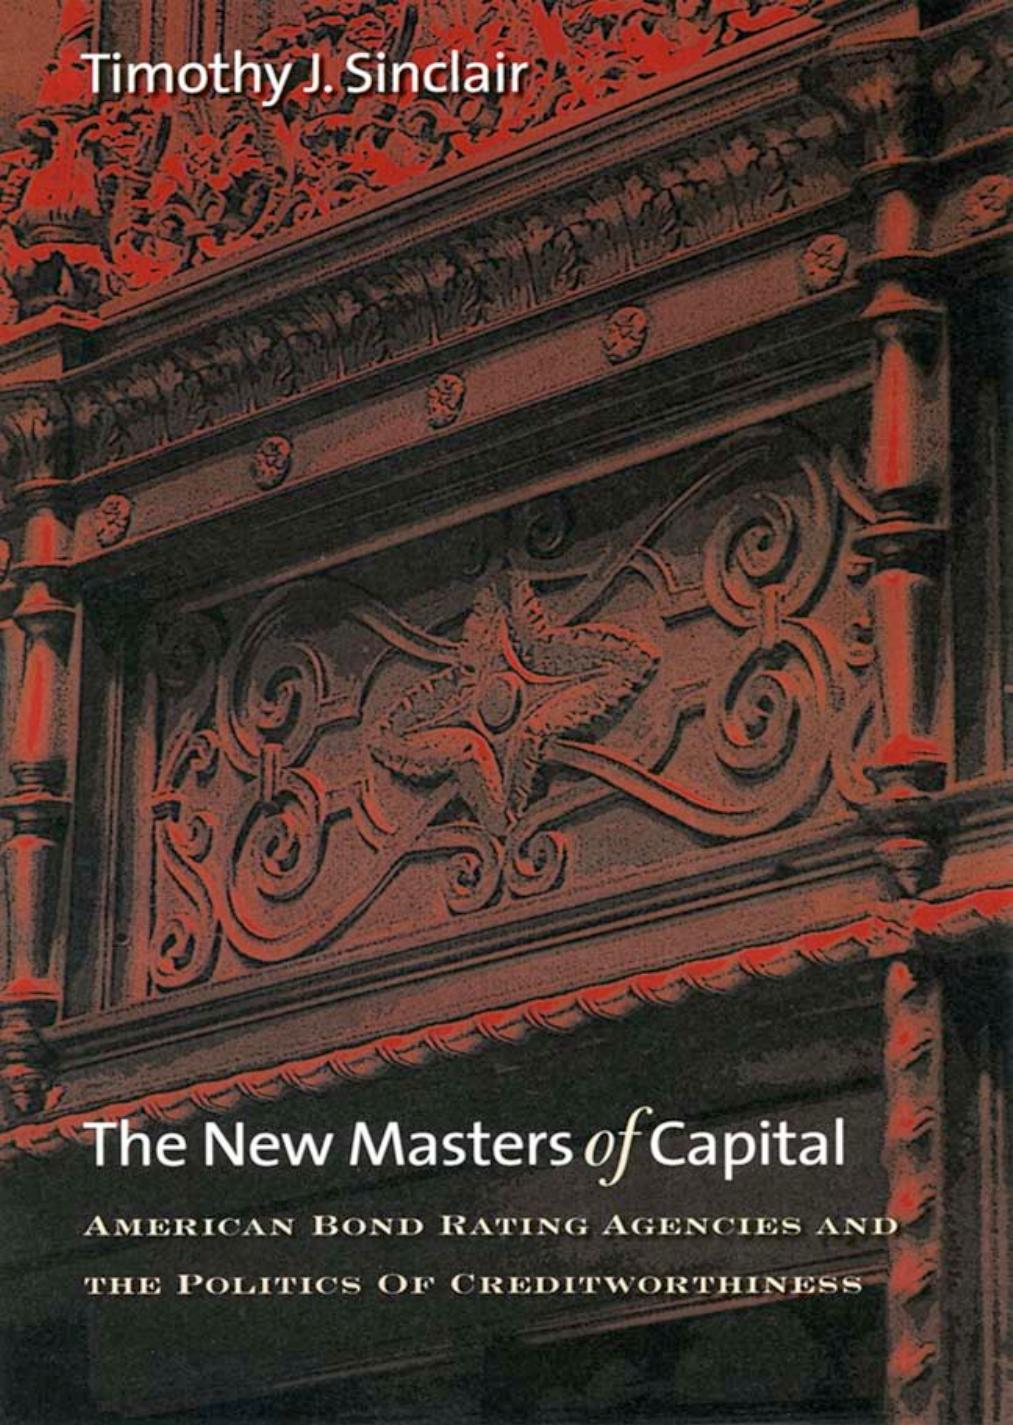 The New Masters of Capital: American Bond Rating Agencies and the Politics of Creditworthiness by by Timothy J. Sinclair